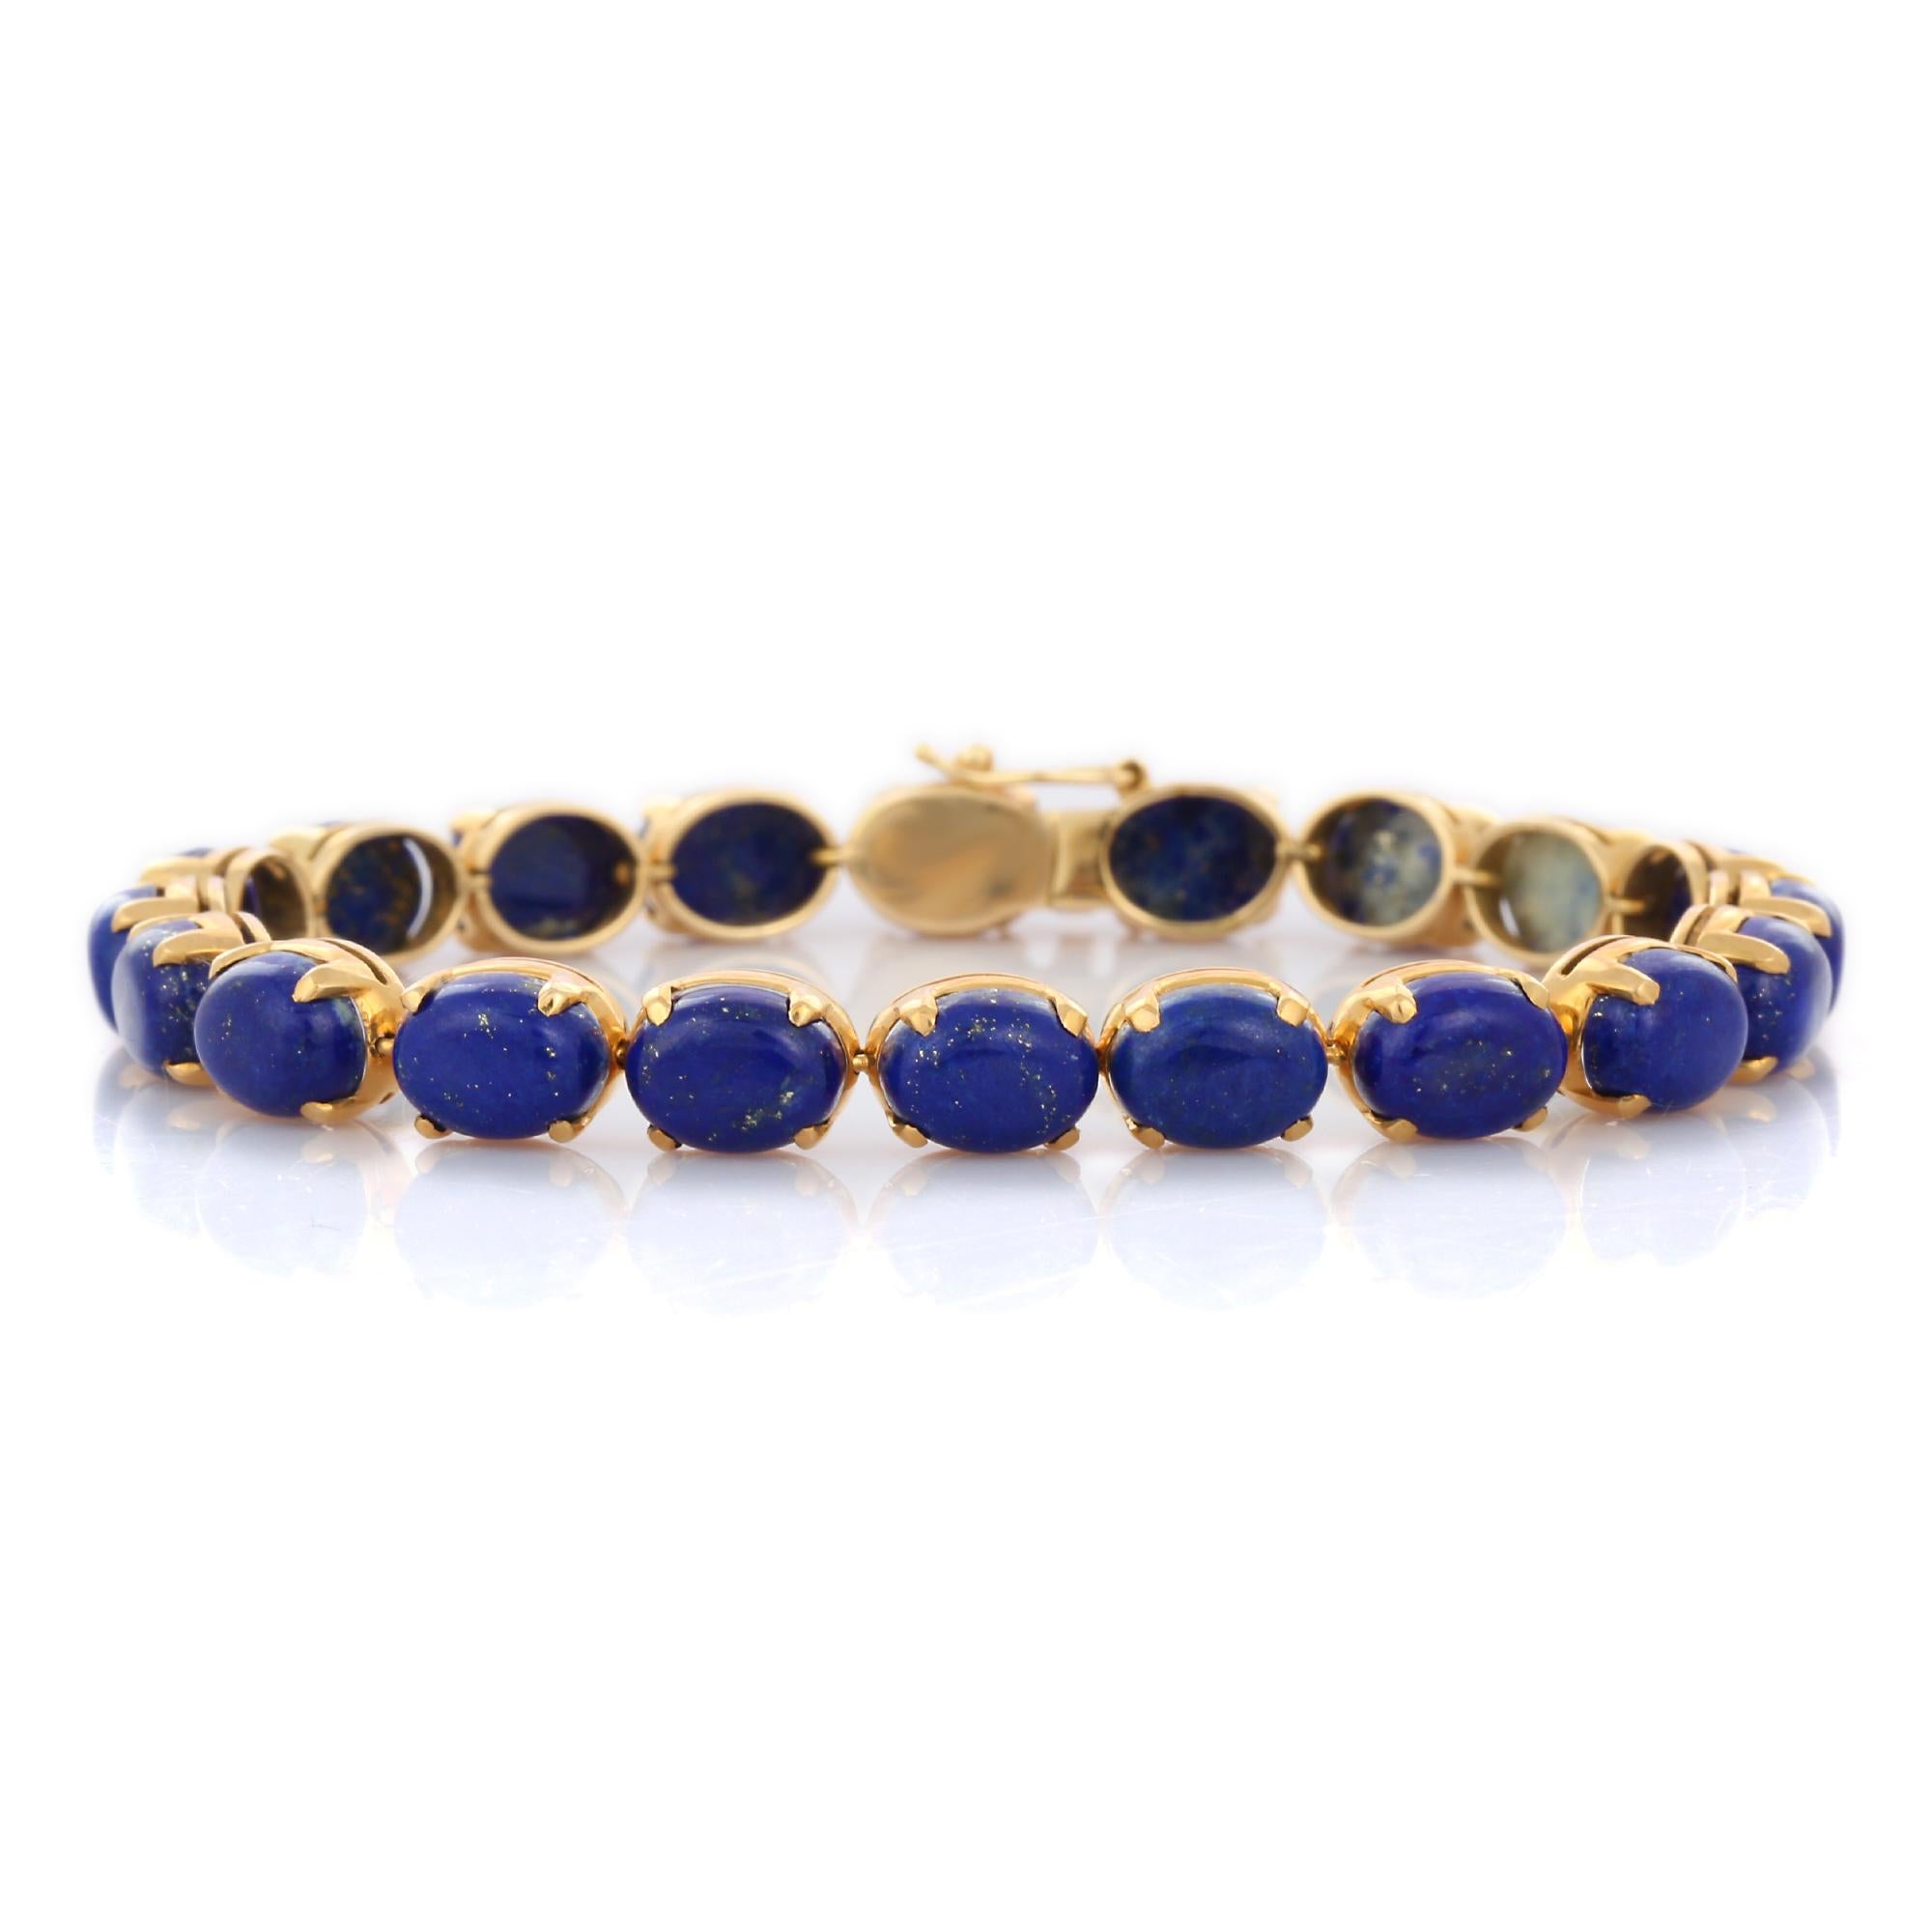 Vintage Prong Setting 33.35 Ct Lapis Lazuli Tennis Bracelet in 14K Yellow Gold In New Condition For Sale In Houston, TX